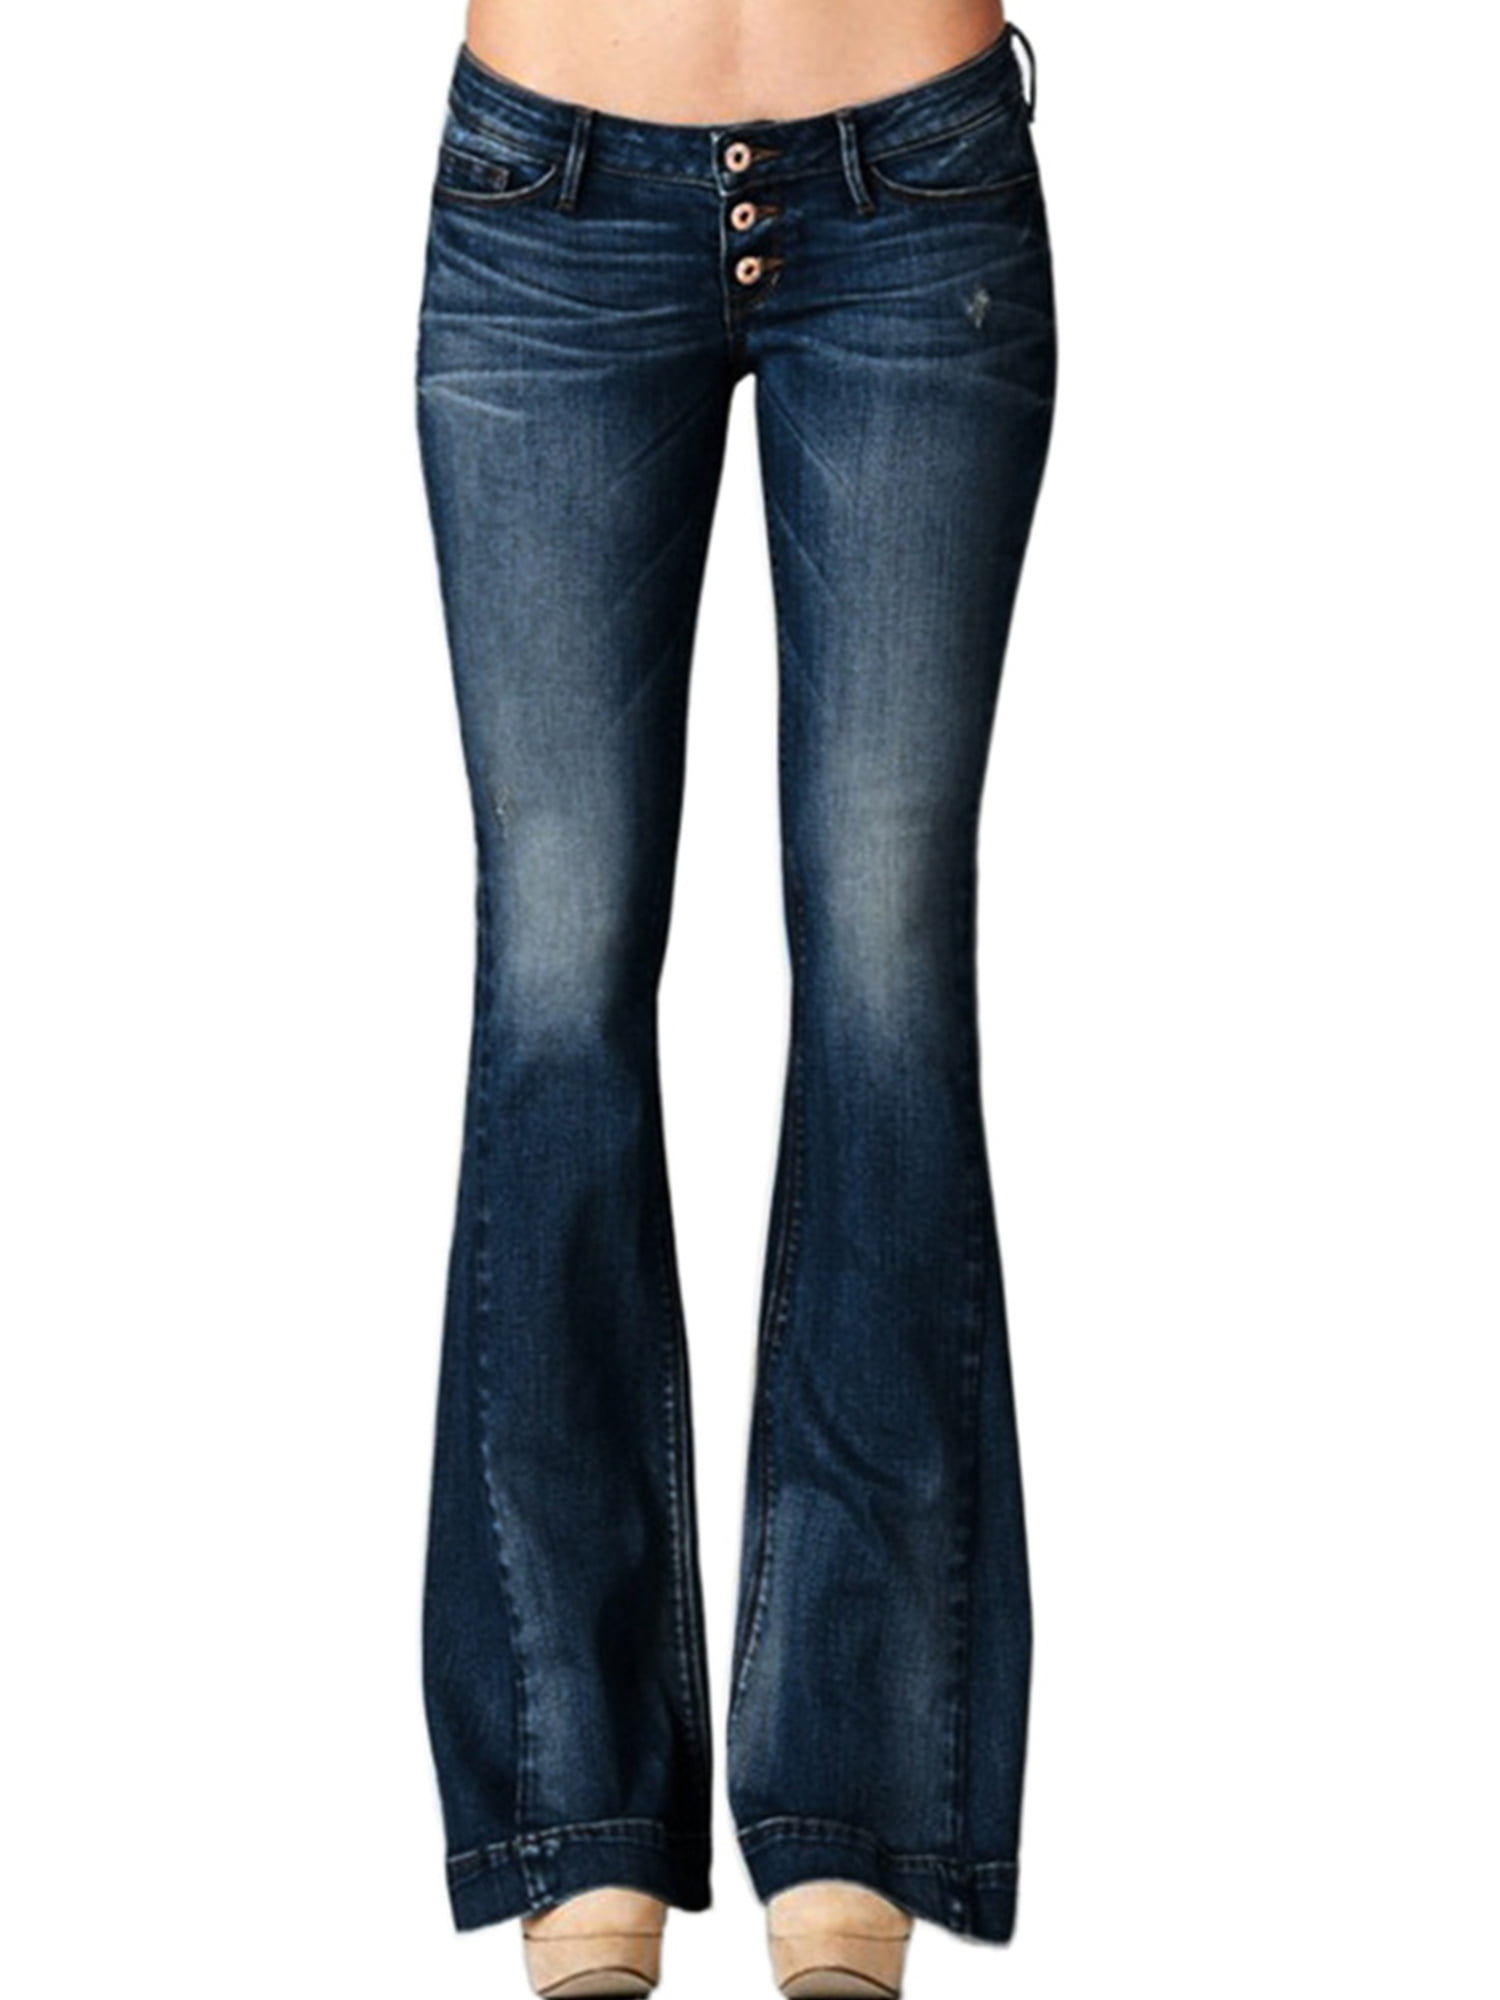 LAPA Women Bell Bottom Low Rise Jeans Buttons Flared Denim Pants ...